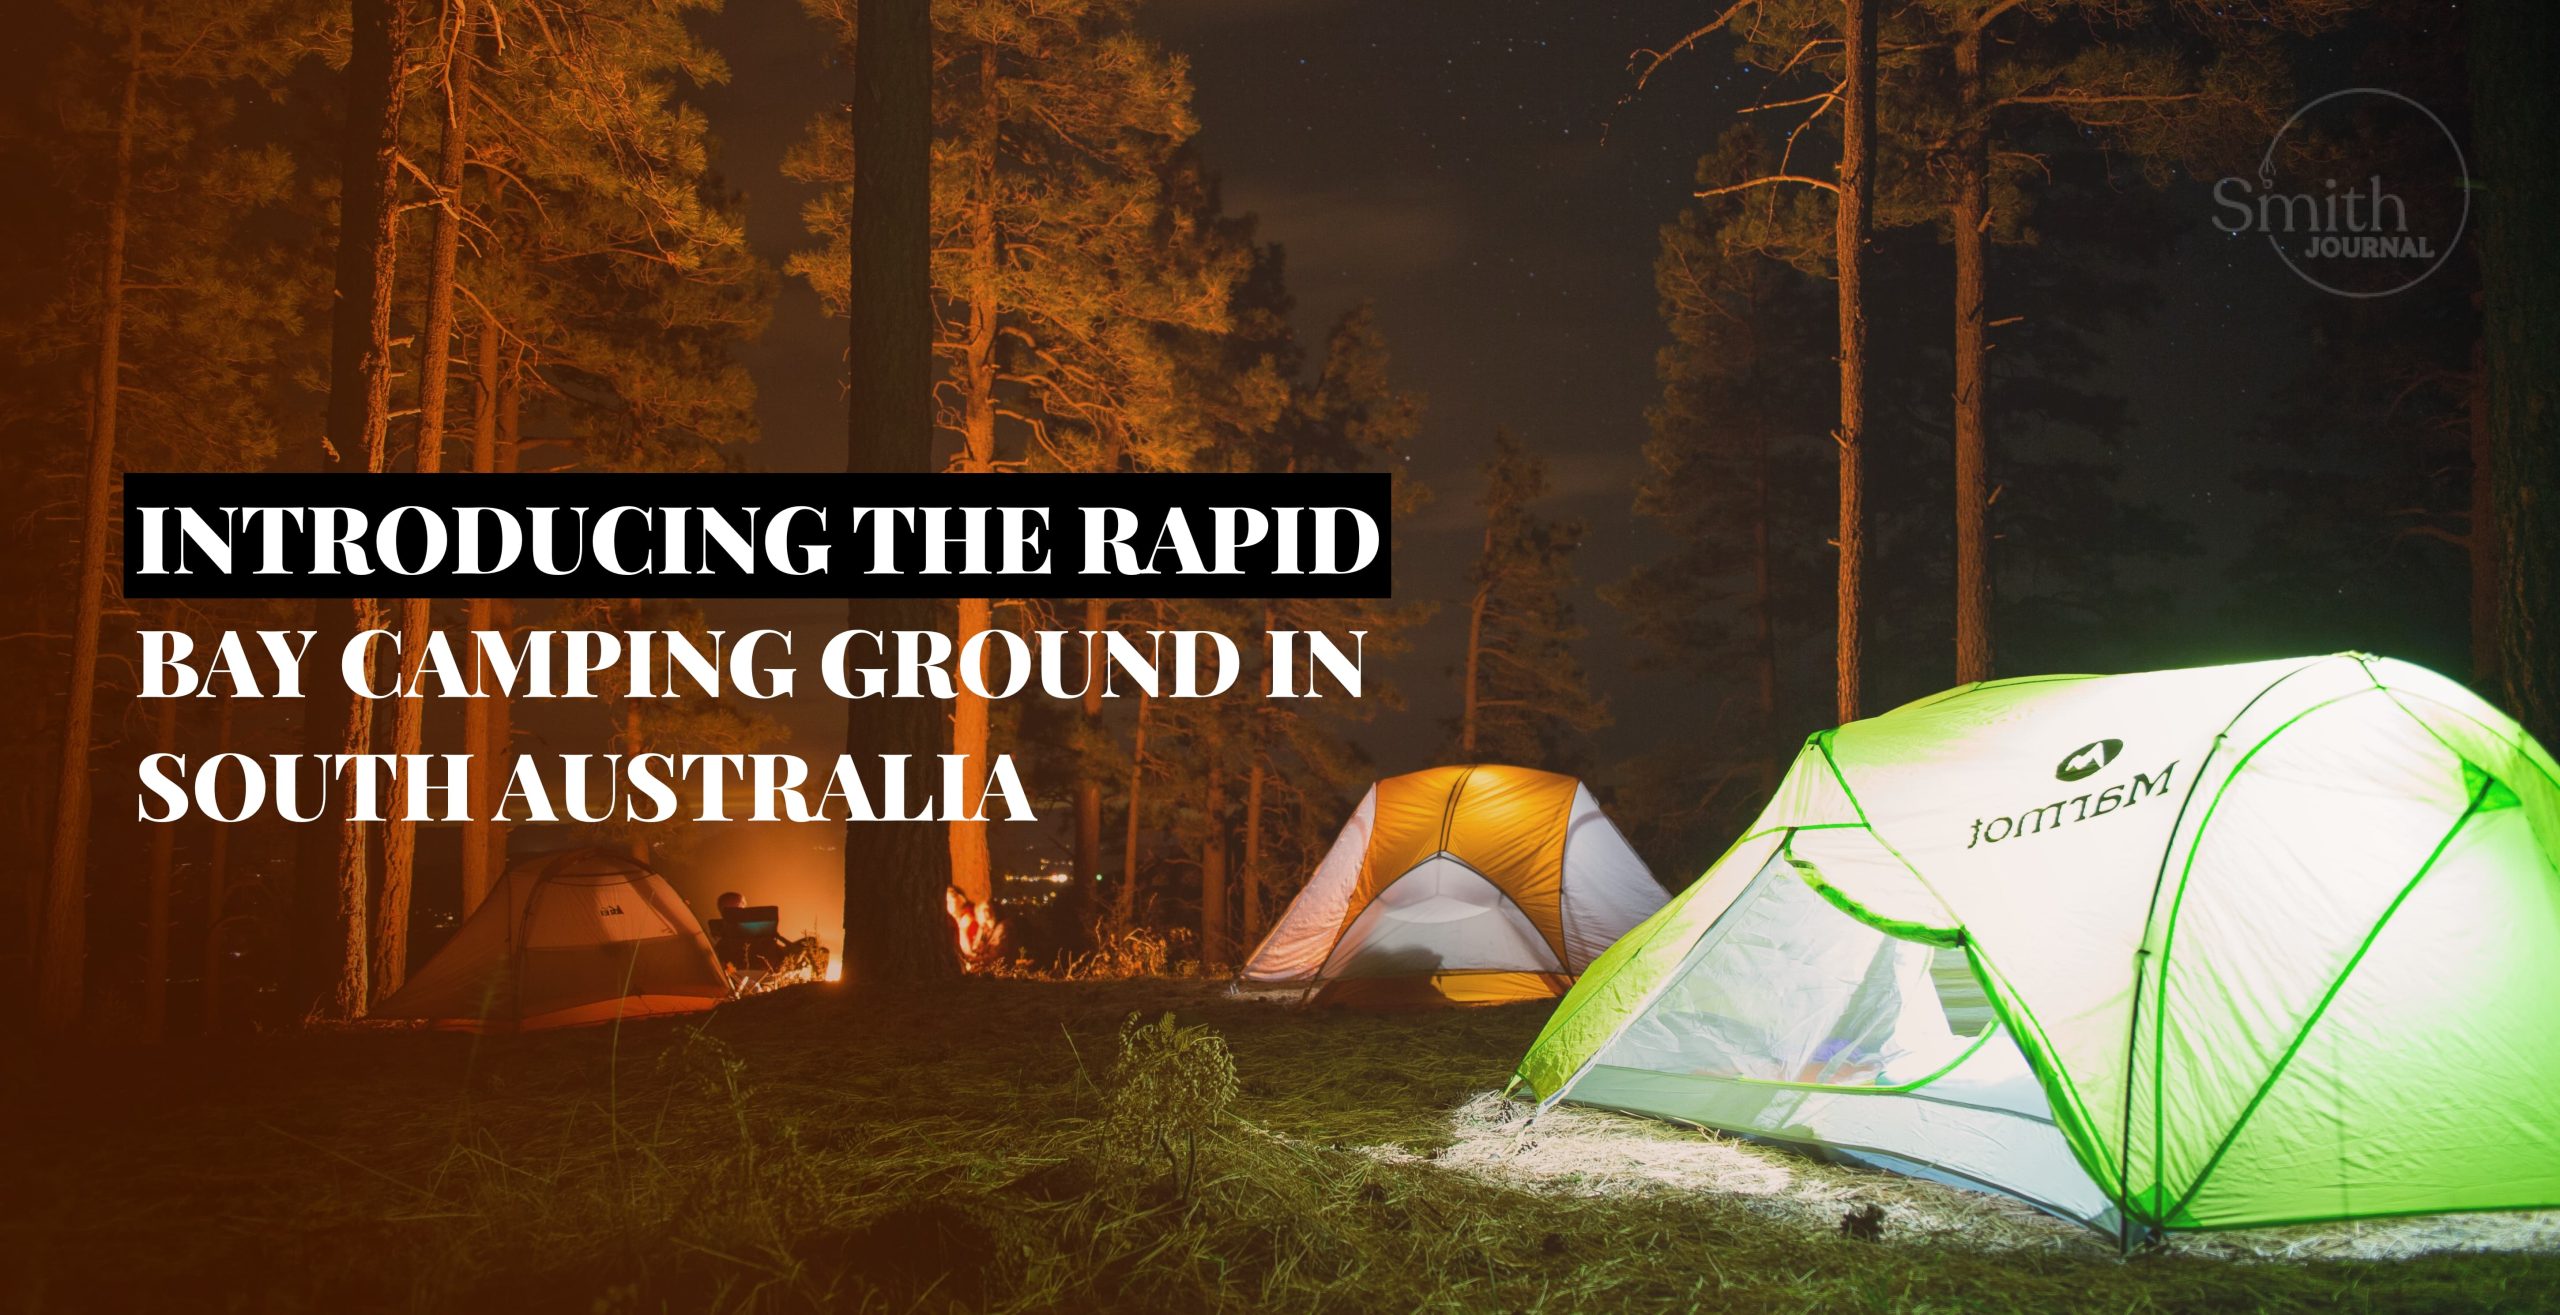 INTRODUCING THE RAPID BAY CAMPING GROUND IN SOUTH AUSTRALIA